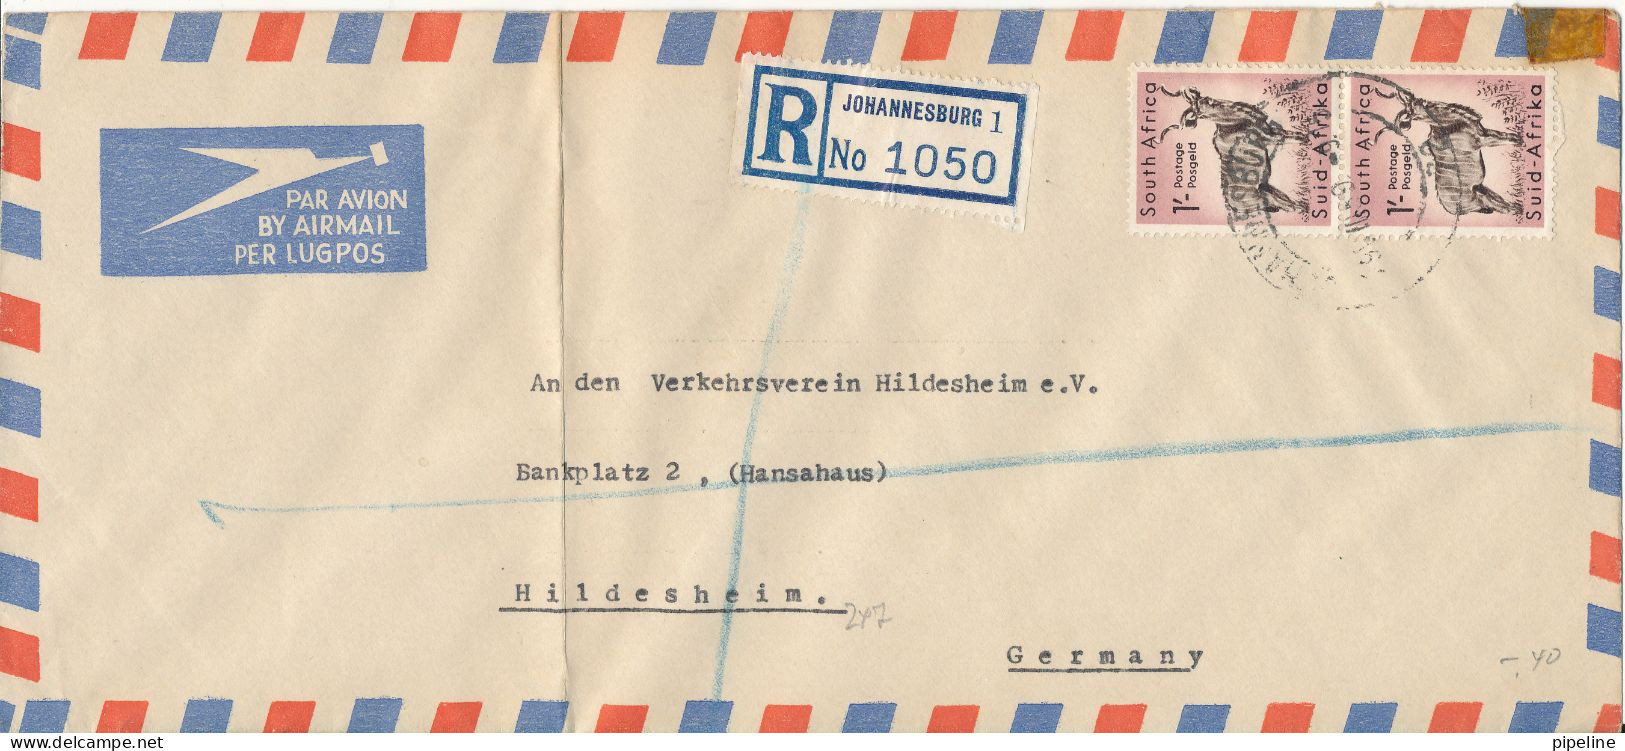 South Africa Registered Air Mail Cover Sent To Germany 1959 Folded Cover Topic Stamps - Luftpost